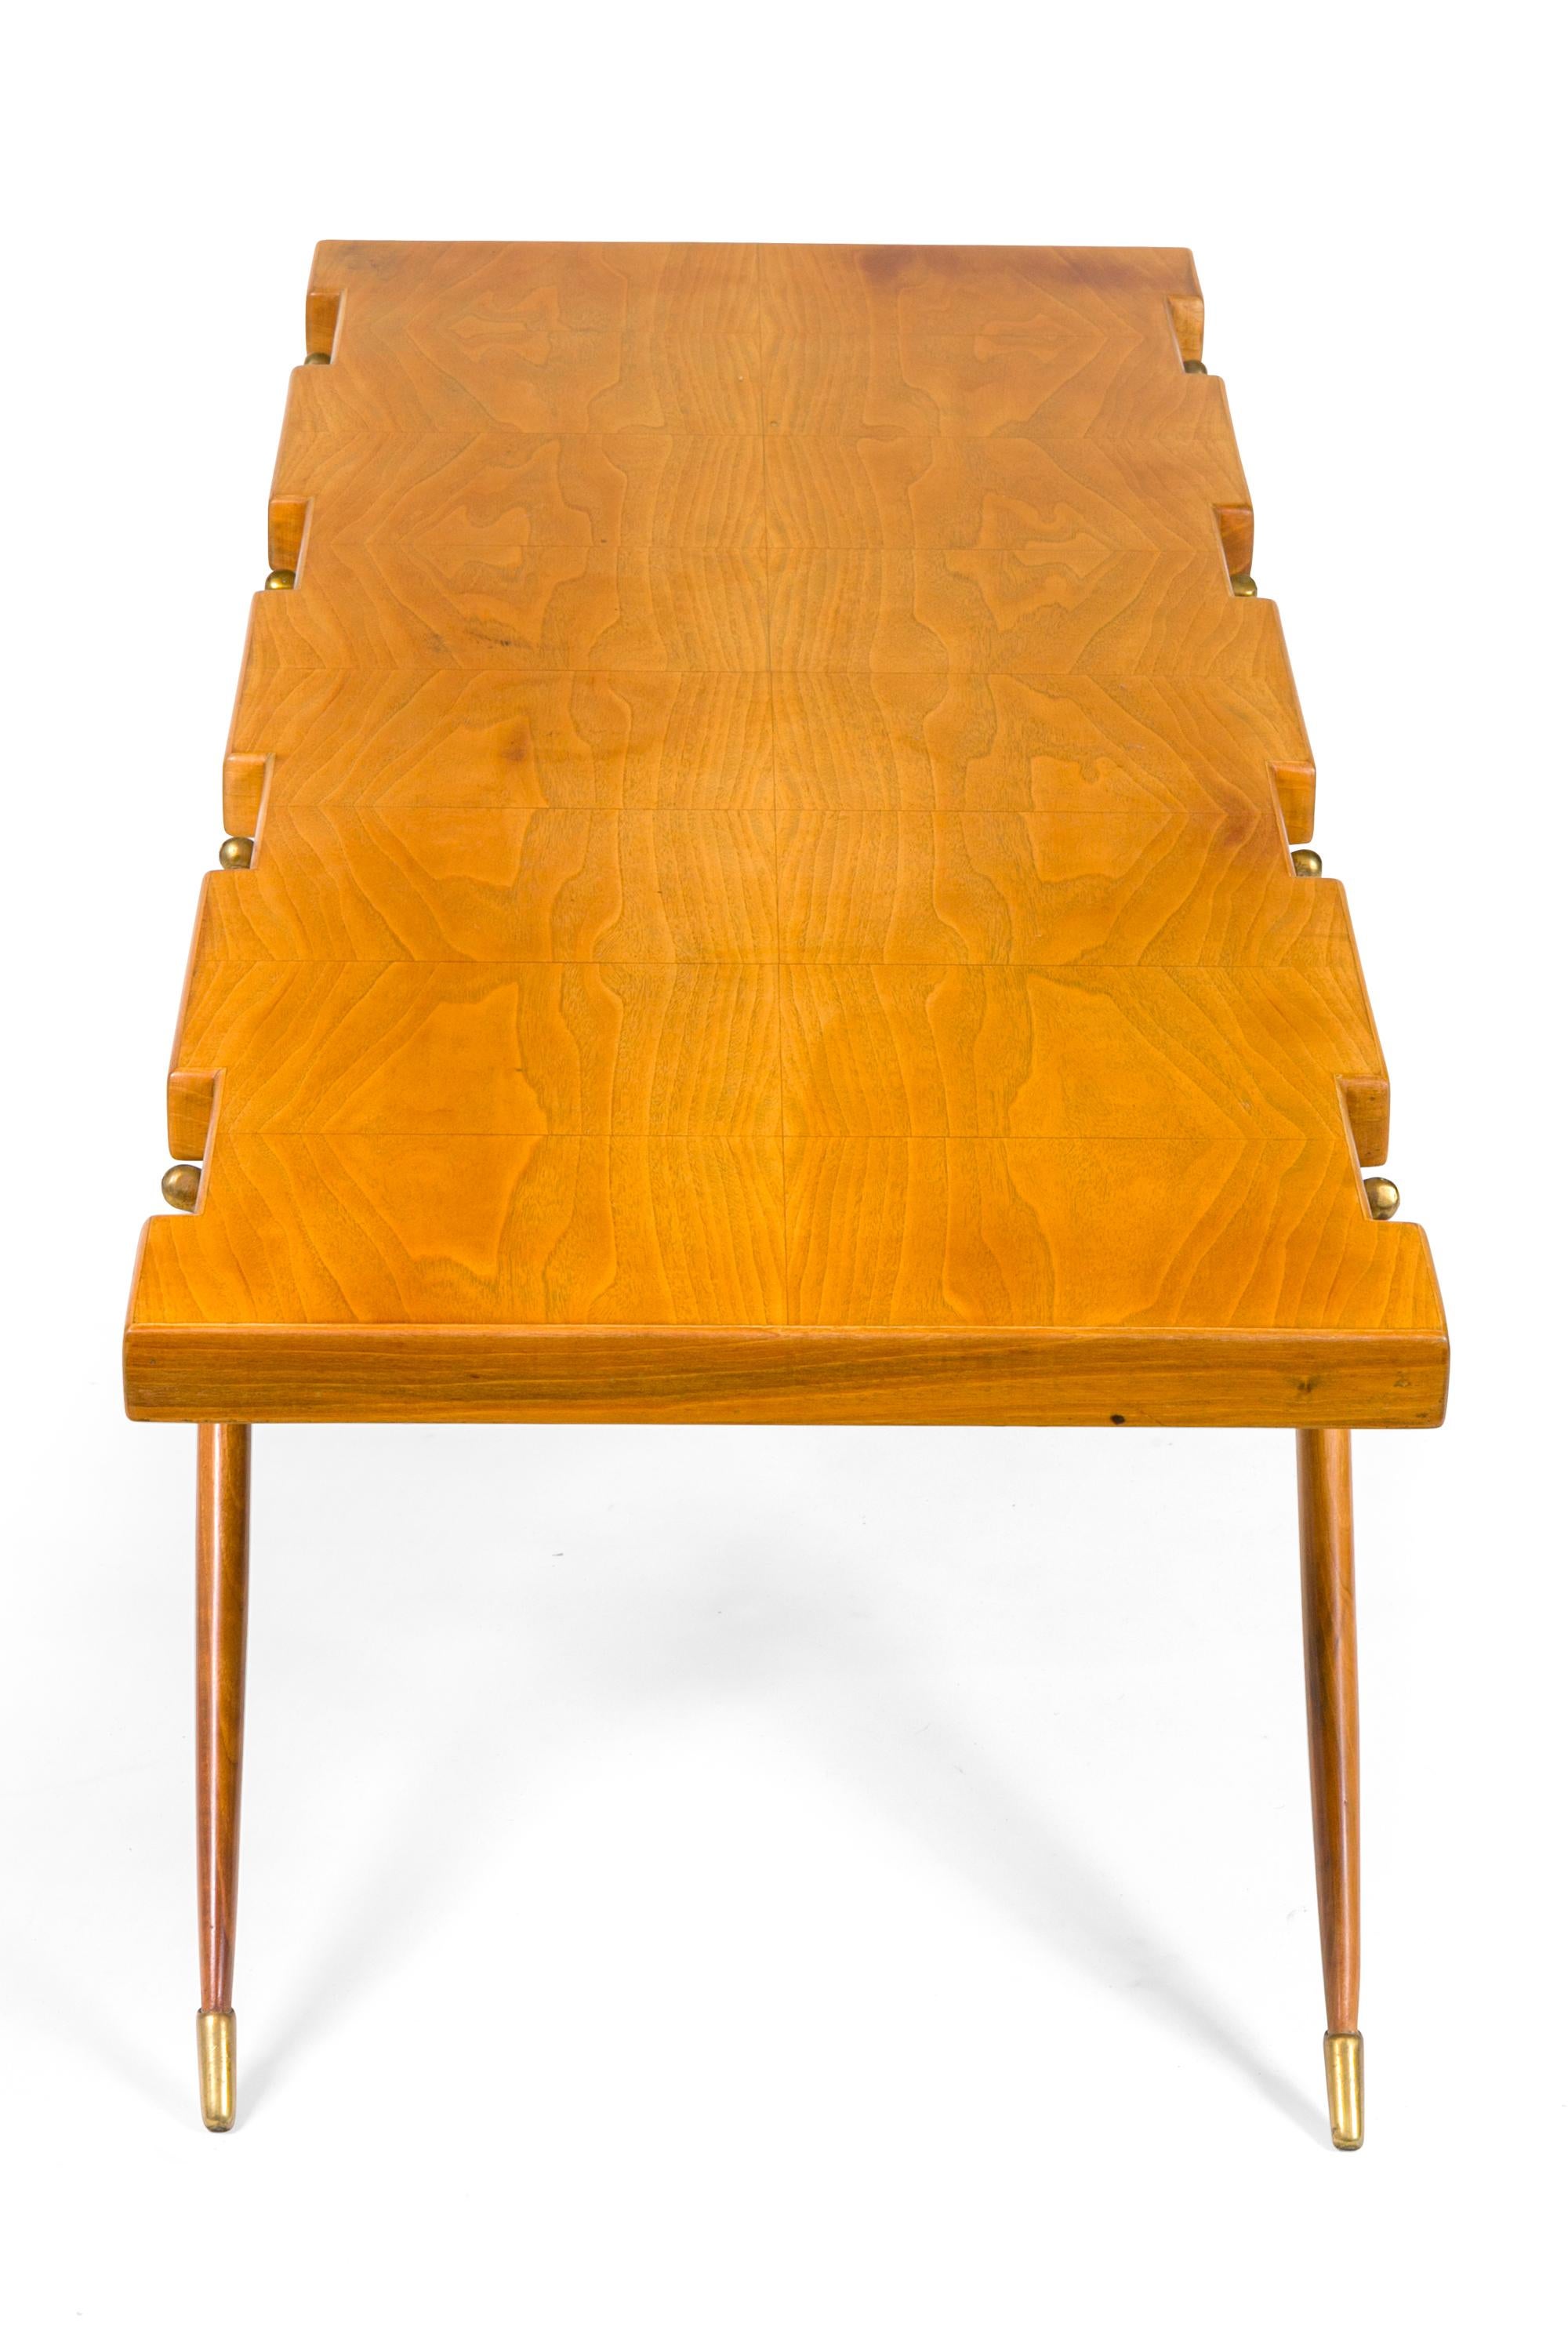 Mid-Century Modern Ico Parisi Coffee Table by Fratelli Rizzi for Singer & Sons, Italy 1951 